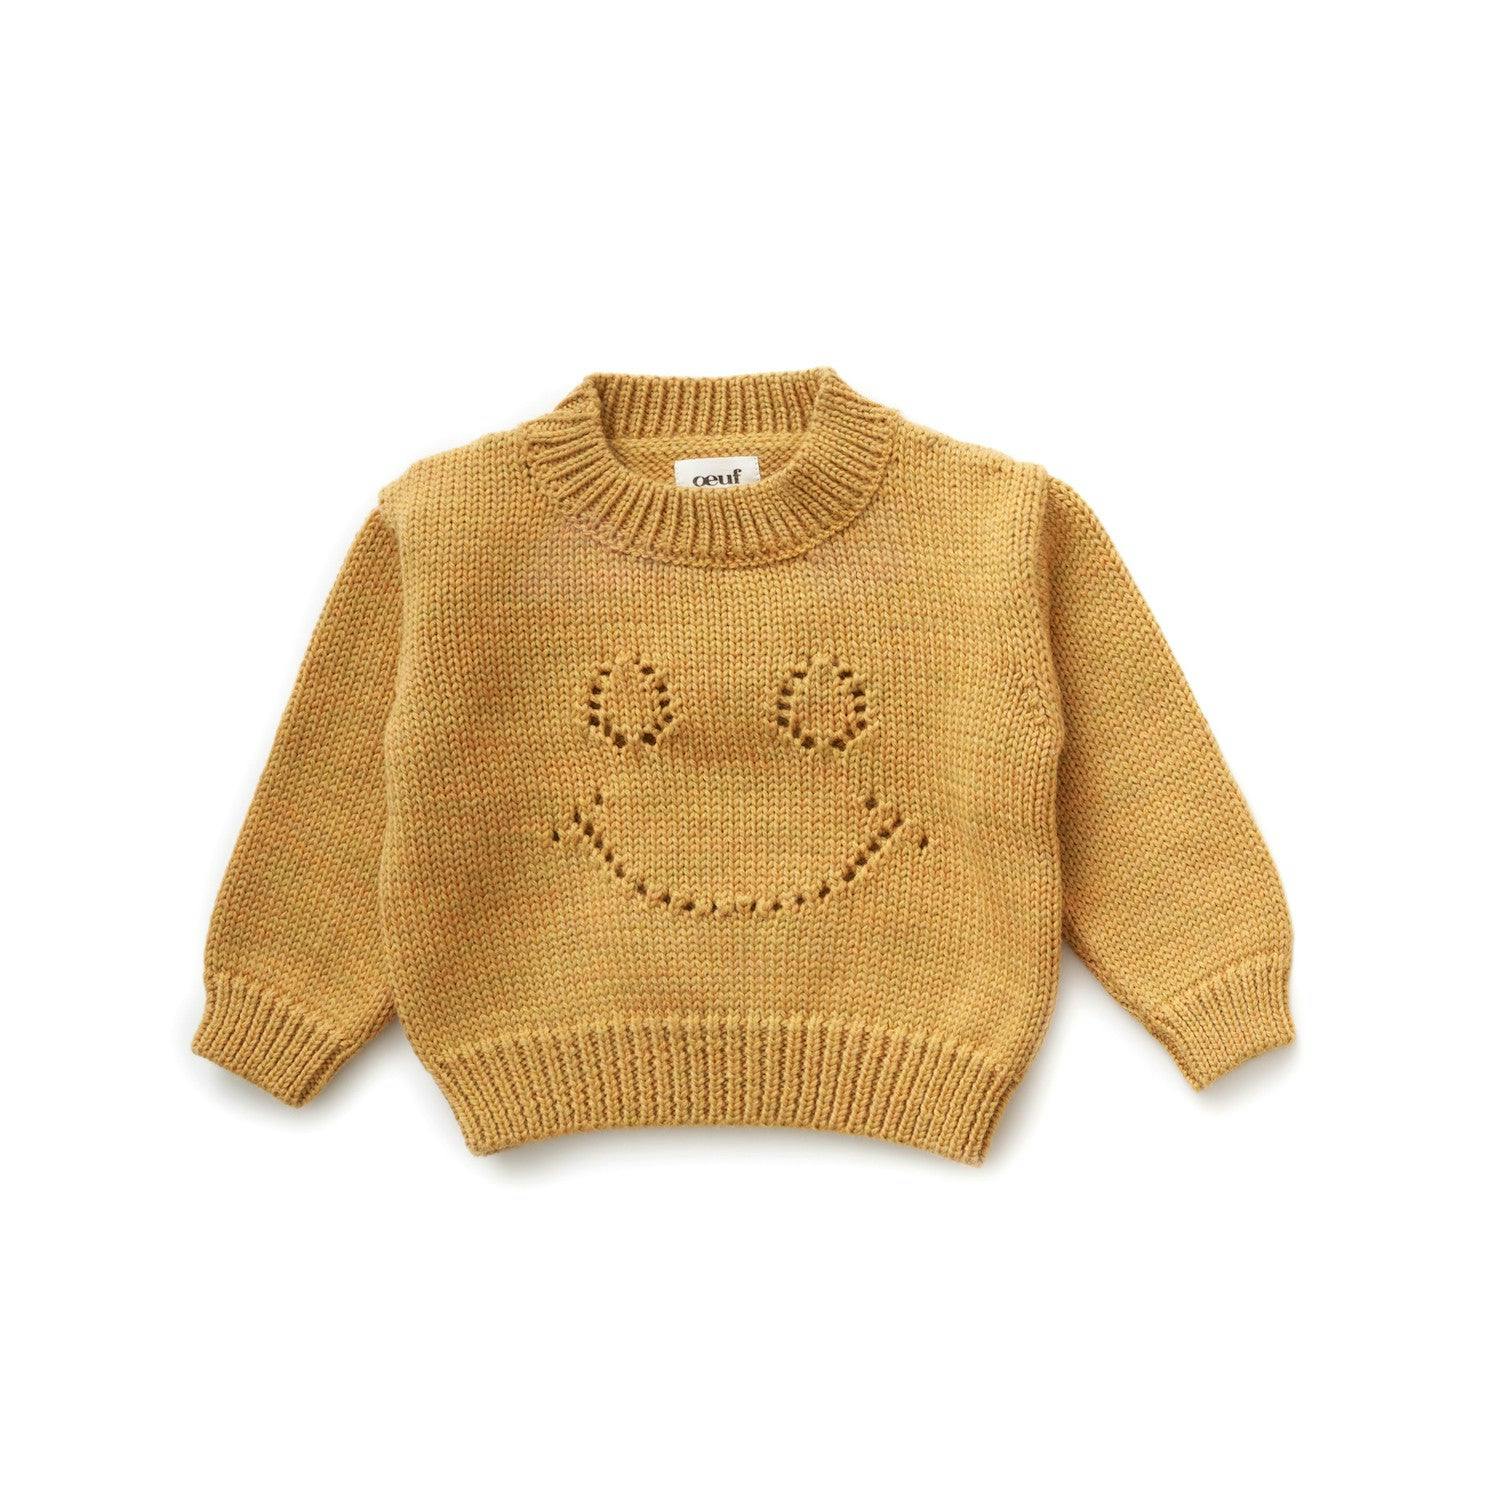 Oeuf Smiley Sweater